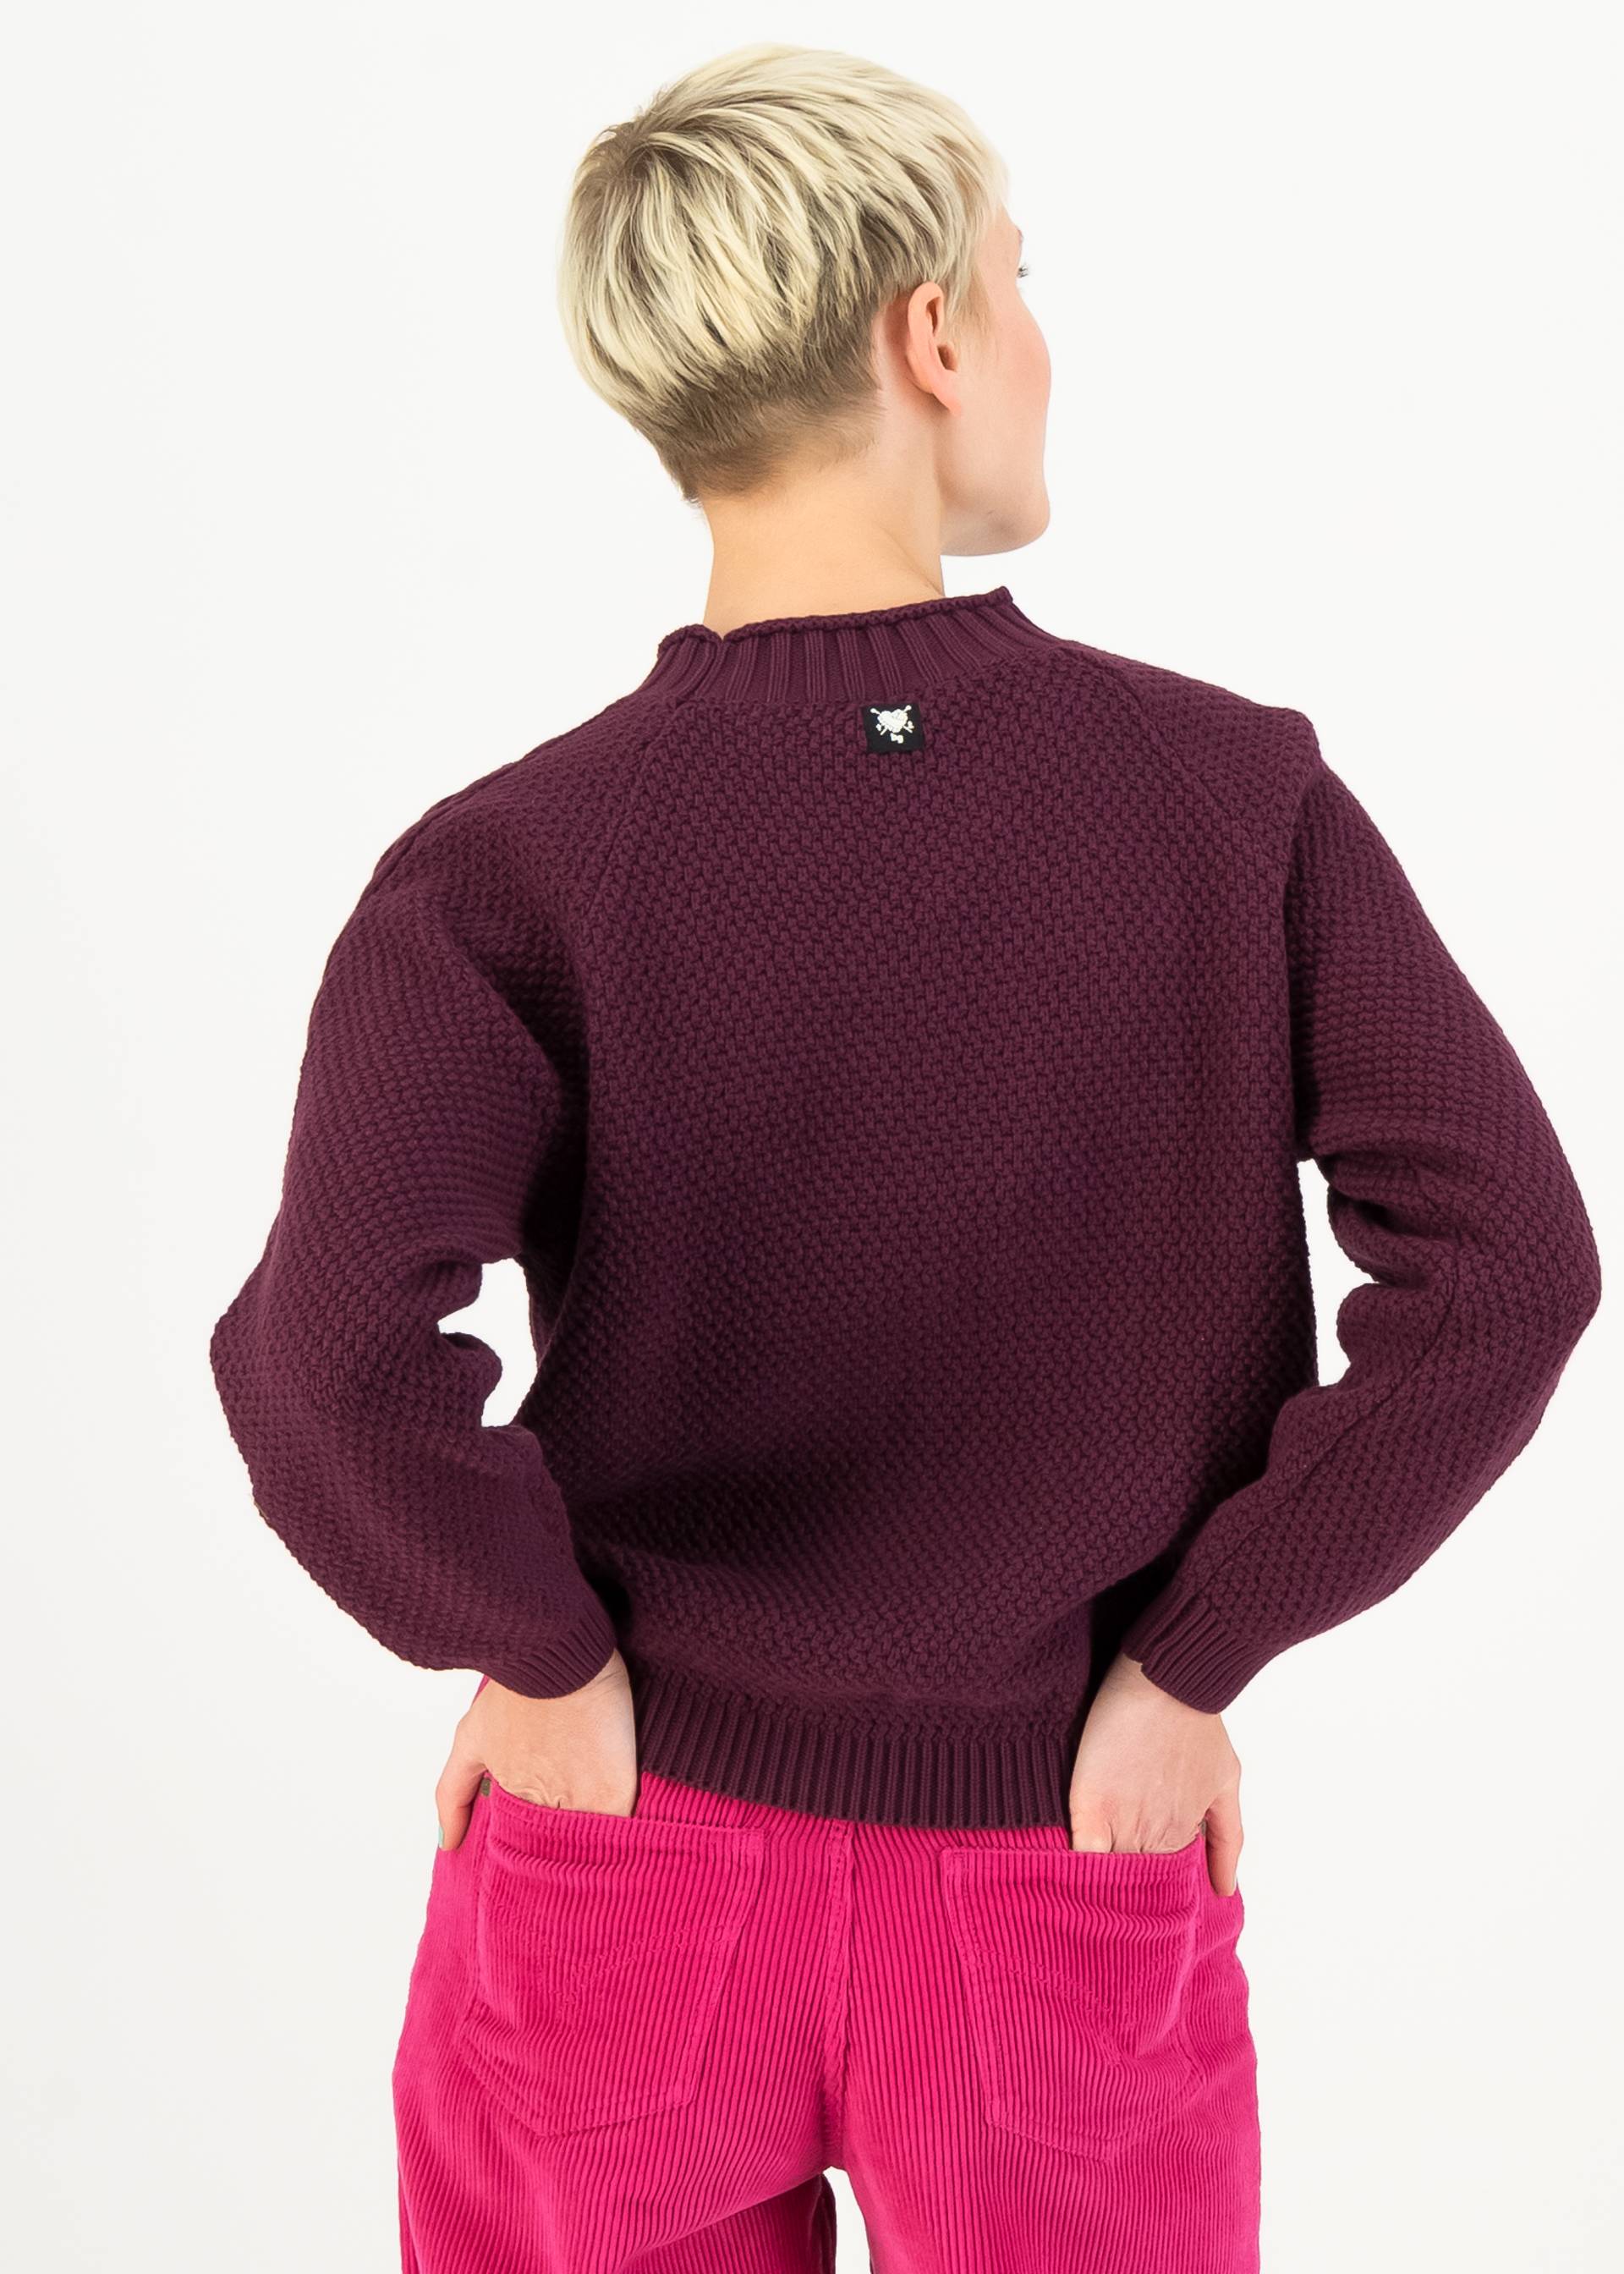 Strickpullover hurly burly Knit Knot, entertainment knit, Strickpullover & Cardigans, Lila